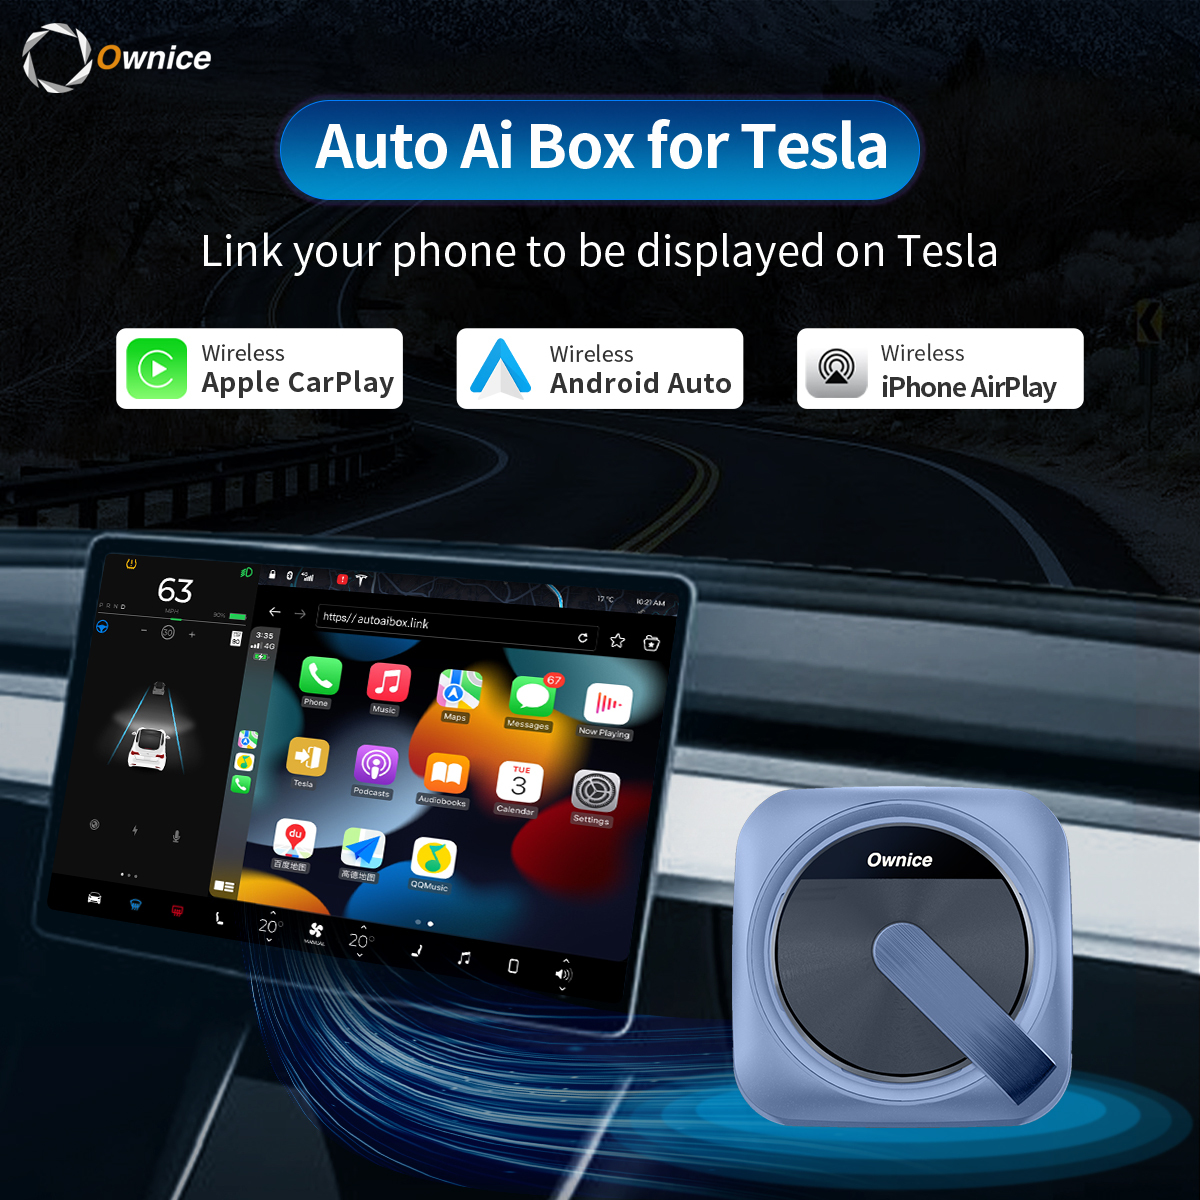 https://images.51microshop.com/12064/product/20231020/Wireless_Ownice_Carplay_Android_Auto_for_Tesla_Connect_Siri_Assistant_Control_Bluetooth_for_Spotify_Waze_Google_Map_No_Need_Sim_1697767828318_0.jpg